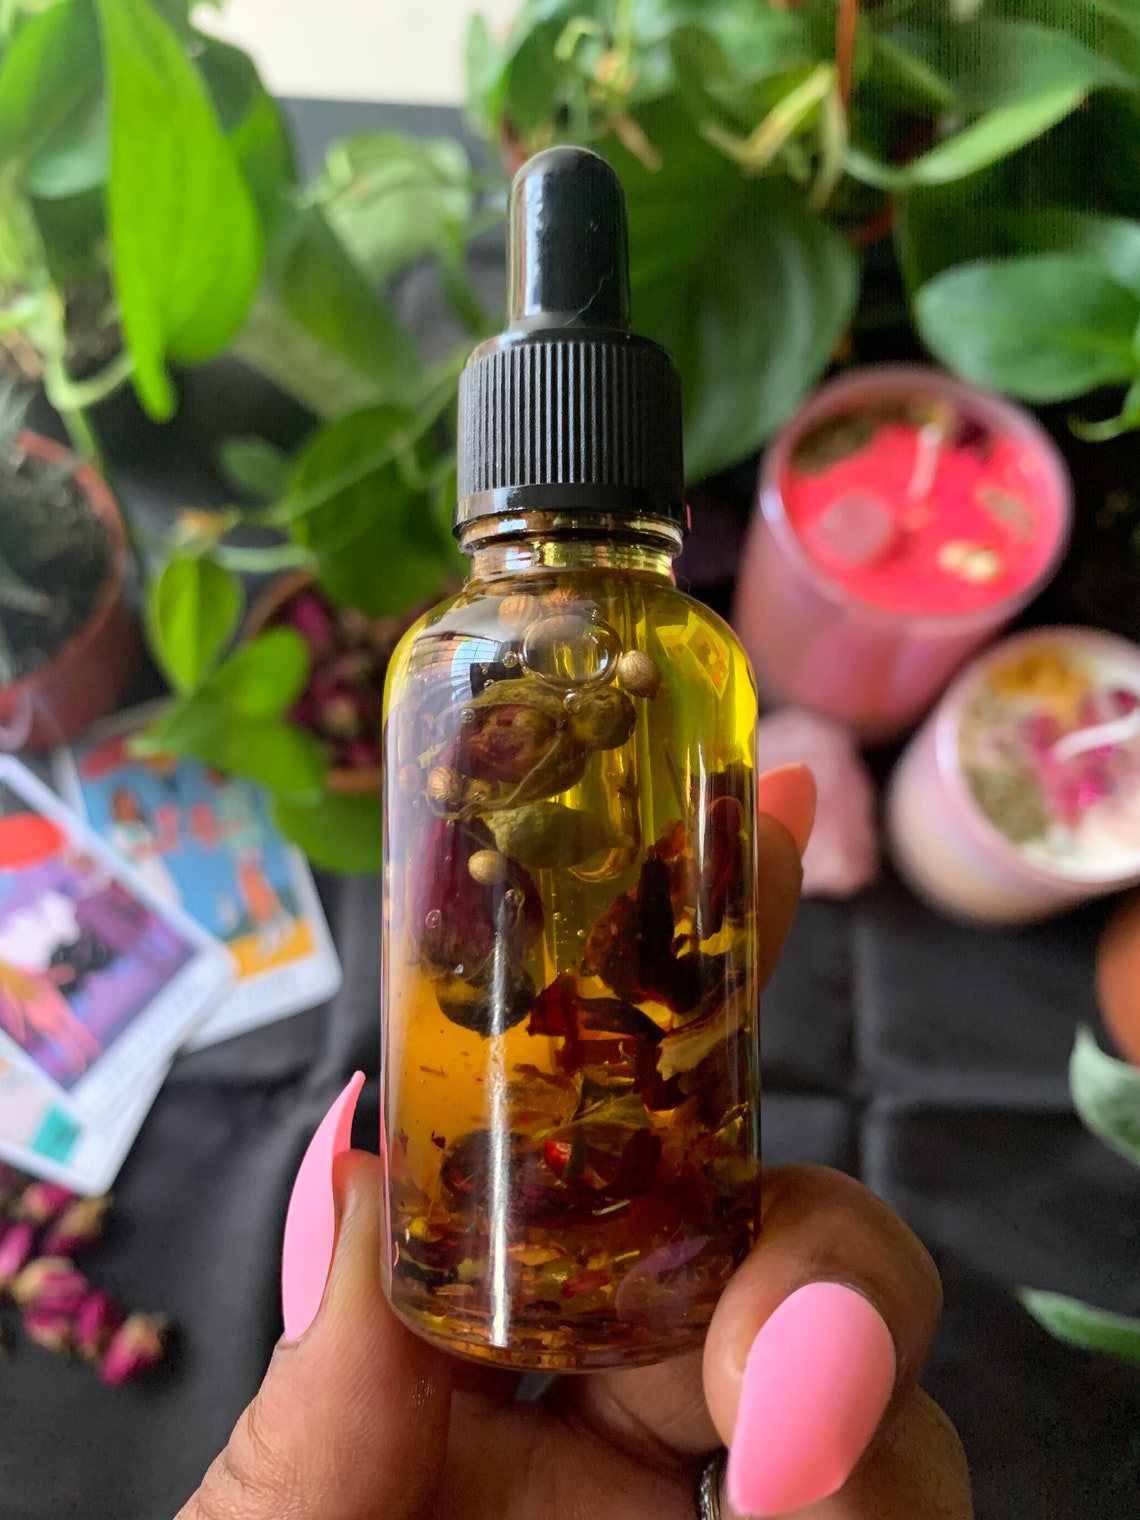 Lust & Passion Intention oil Lust oil Passion Oil Sex | Etsy